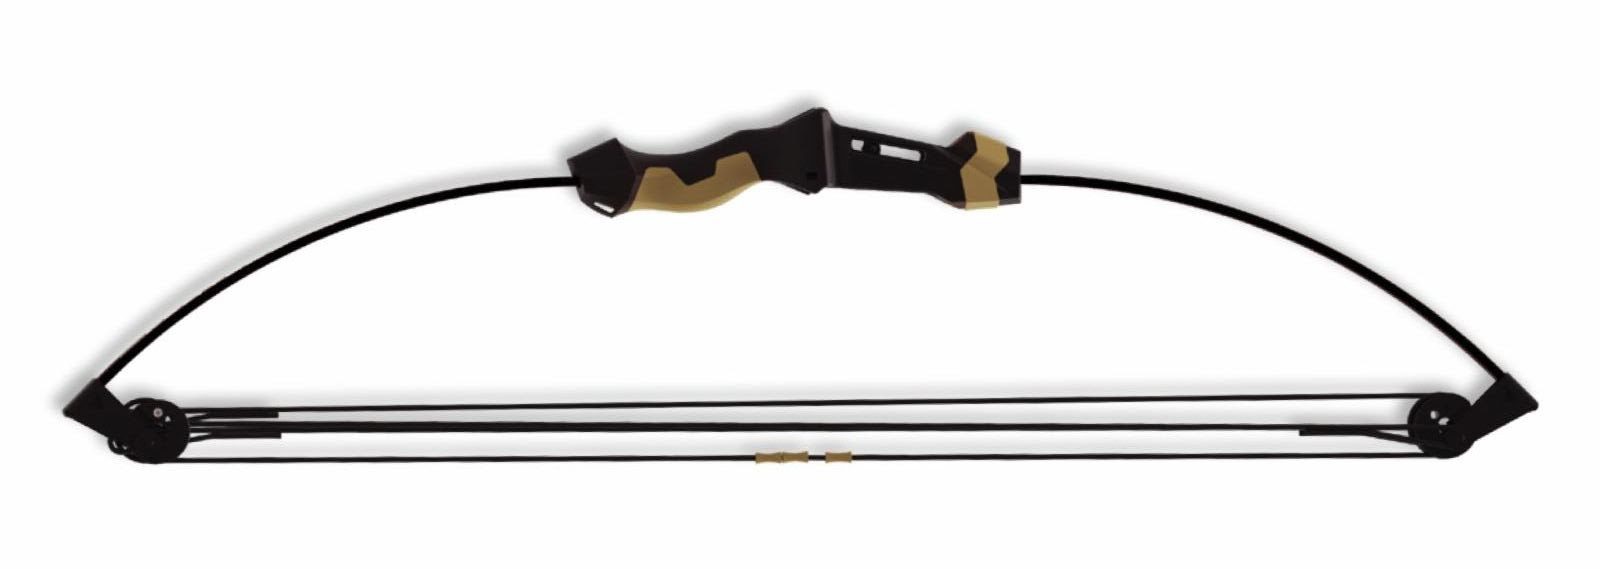 Barnett Youth Bows - The Perfect Christmas Gift for the Young Hunter